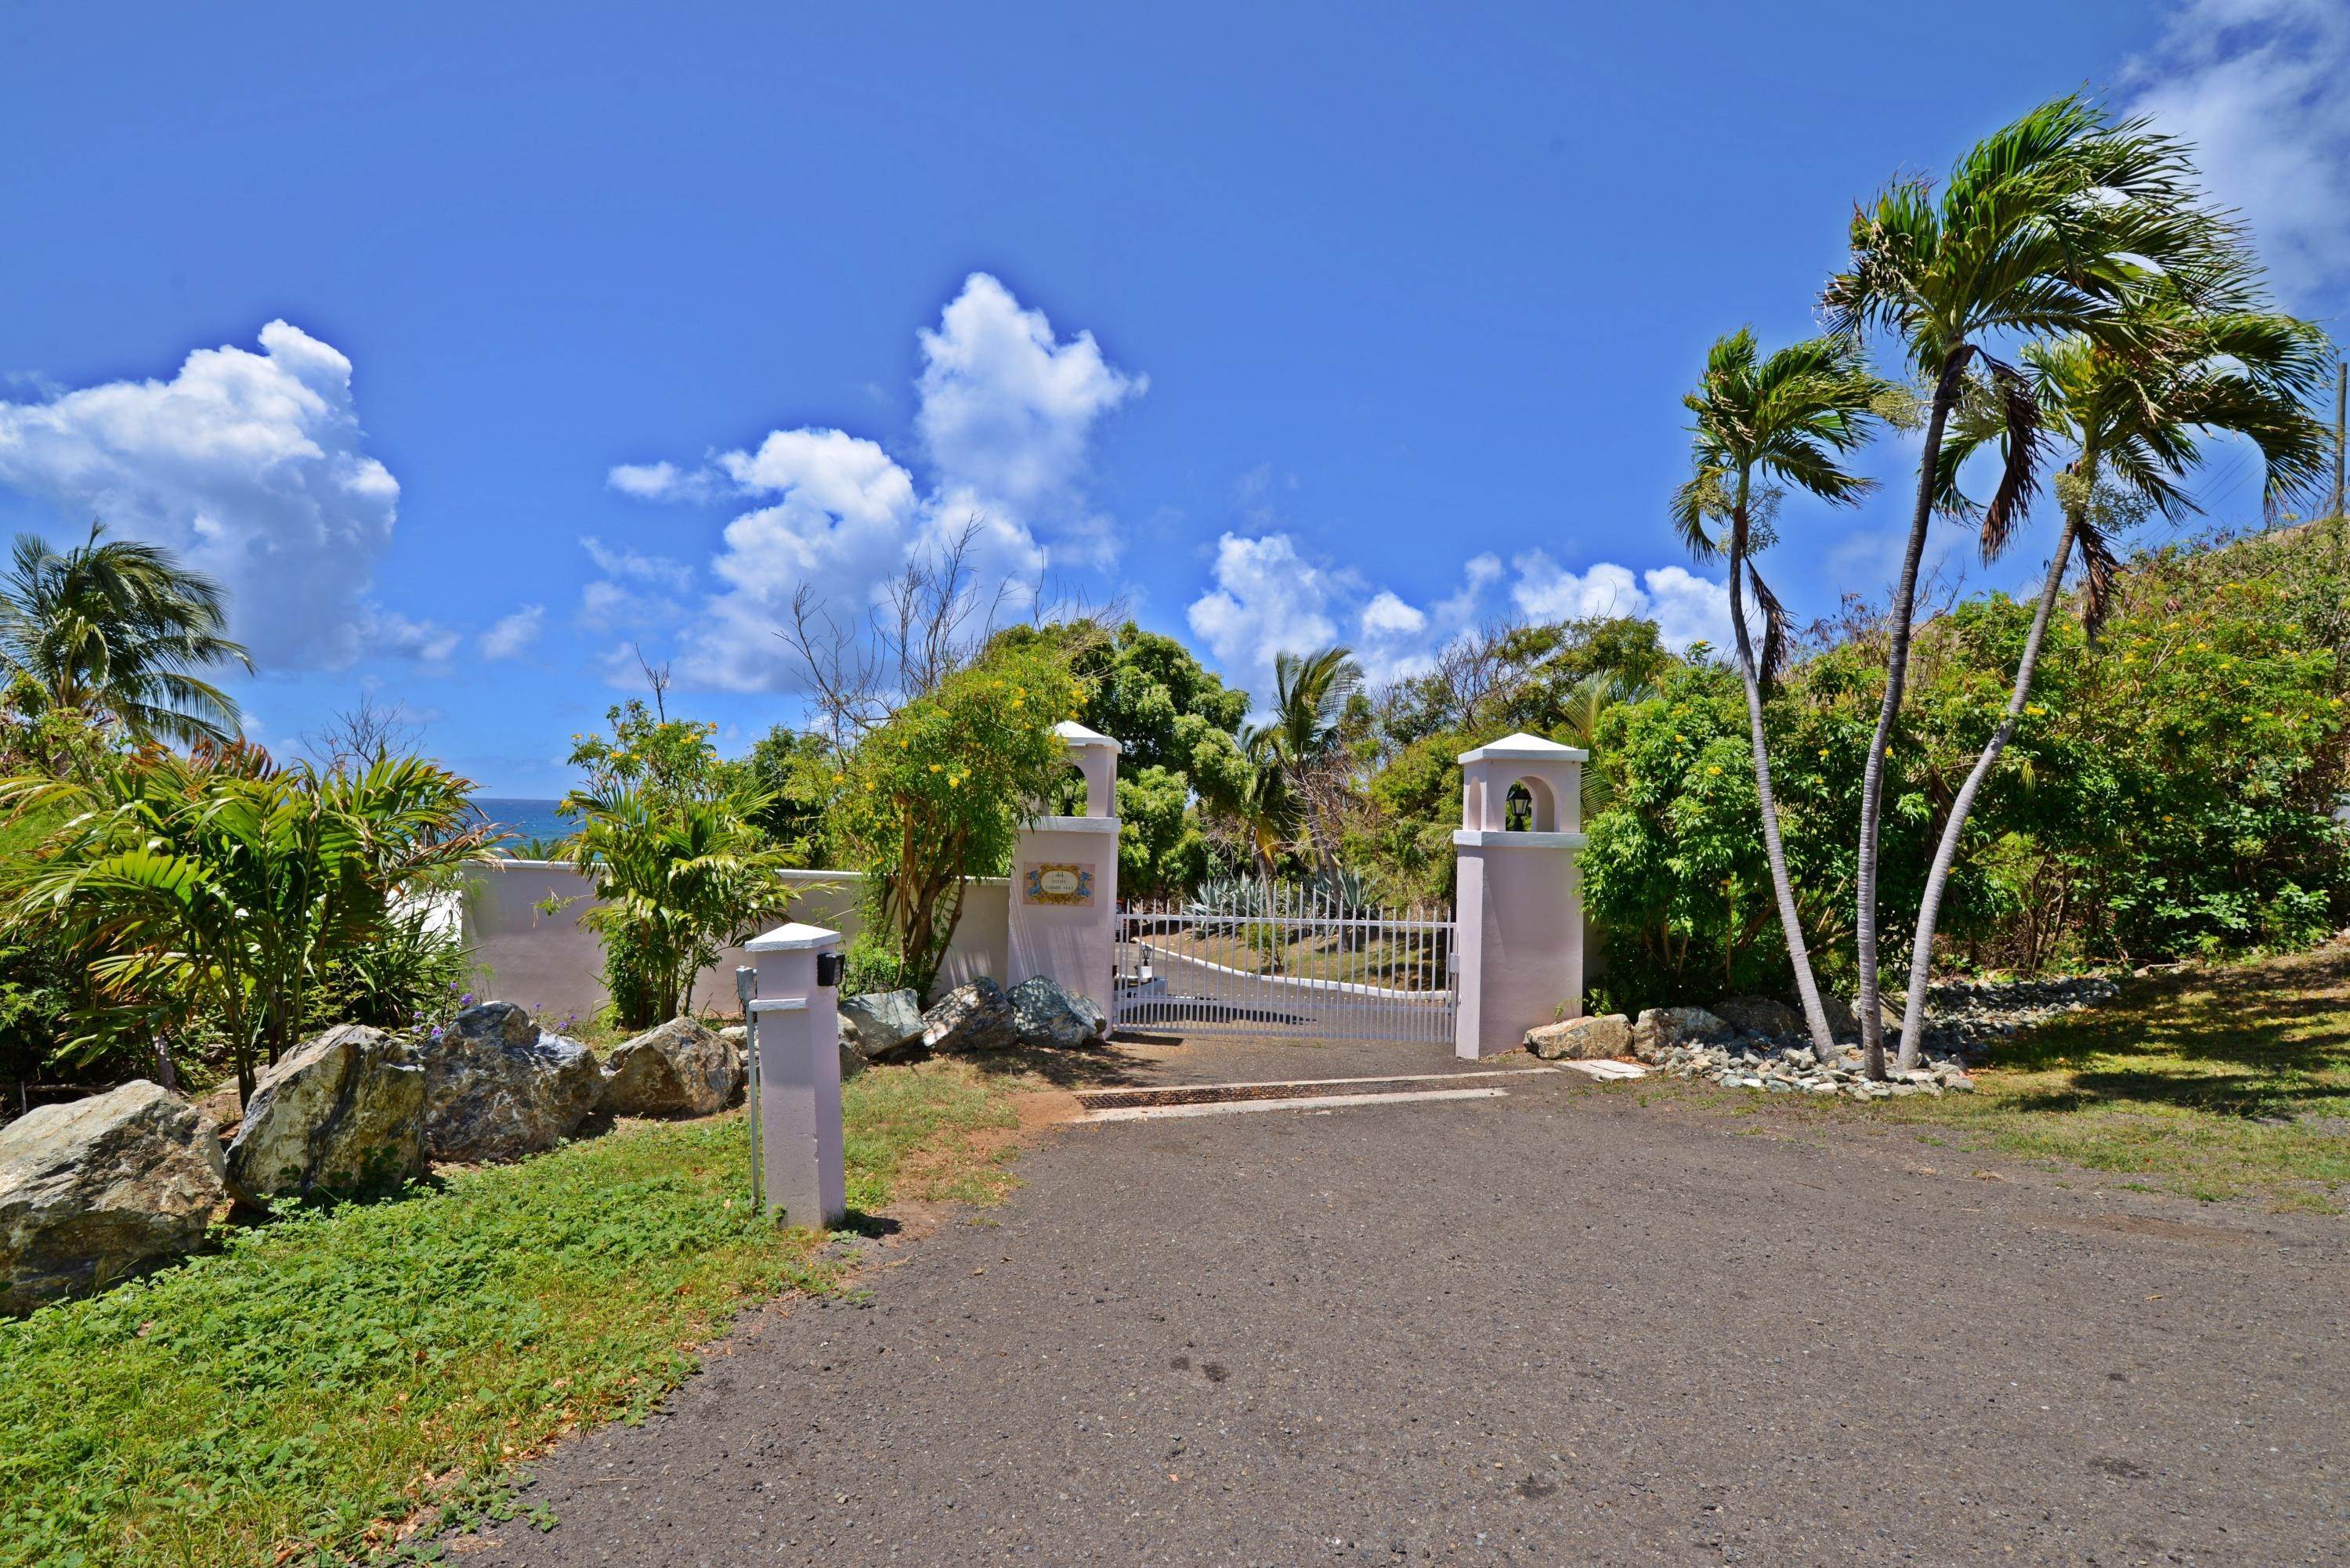 49. Single Family Homes for Sale at 44 Turner's Hole EB St Croix, Virgin Islands 00820 United States Virgin Islands